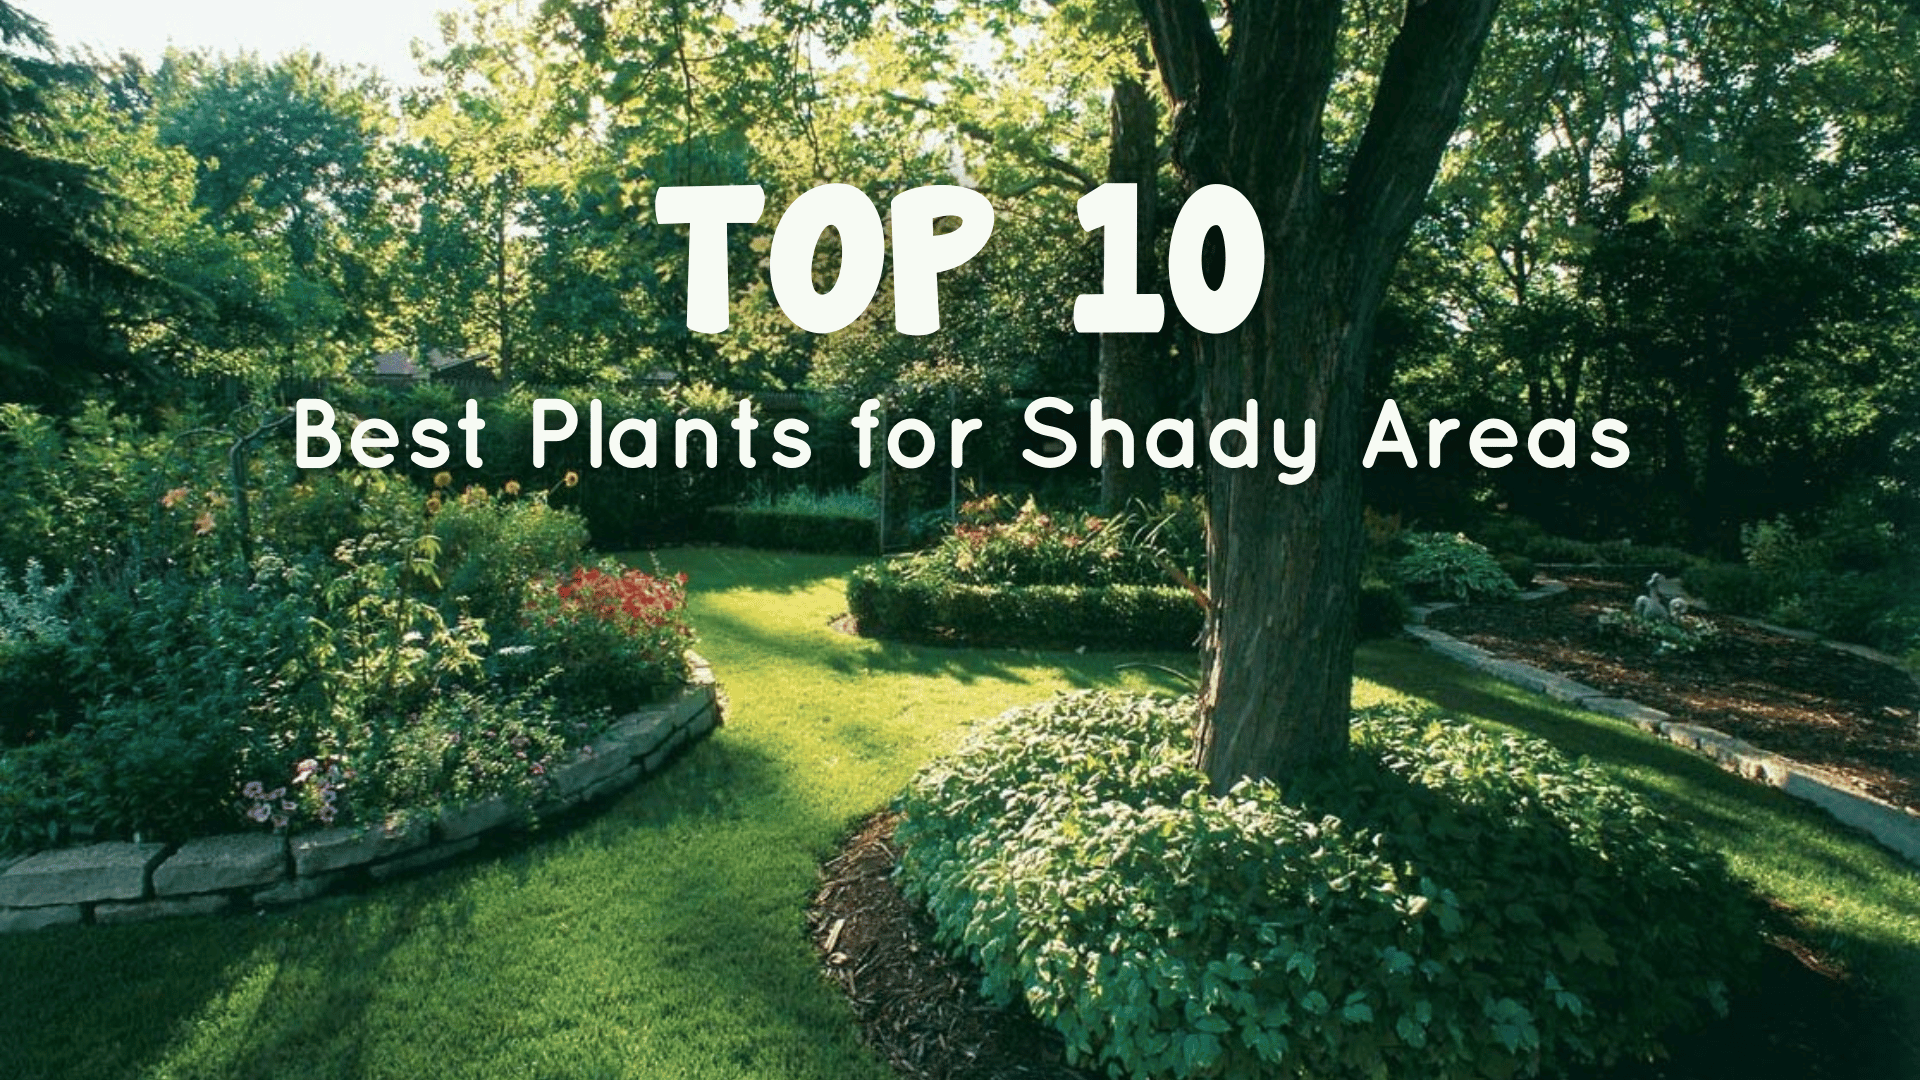 Top 10 Best Plants for Shady Areas